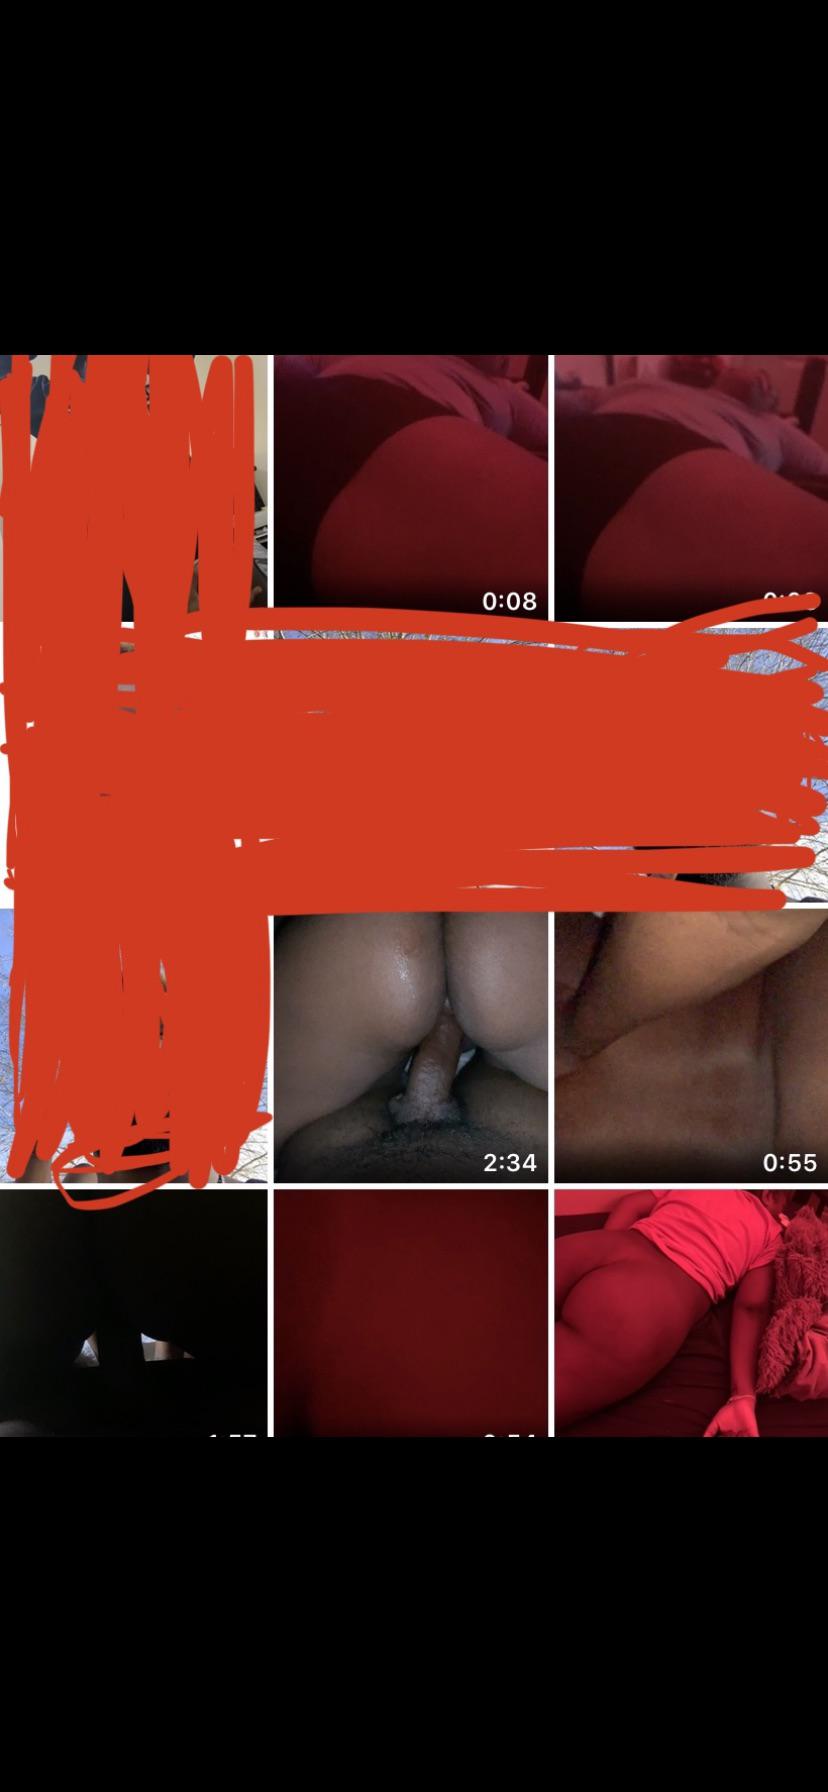 Selling my amateur sex tapes hmu for prices Scrolller